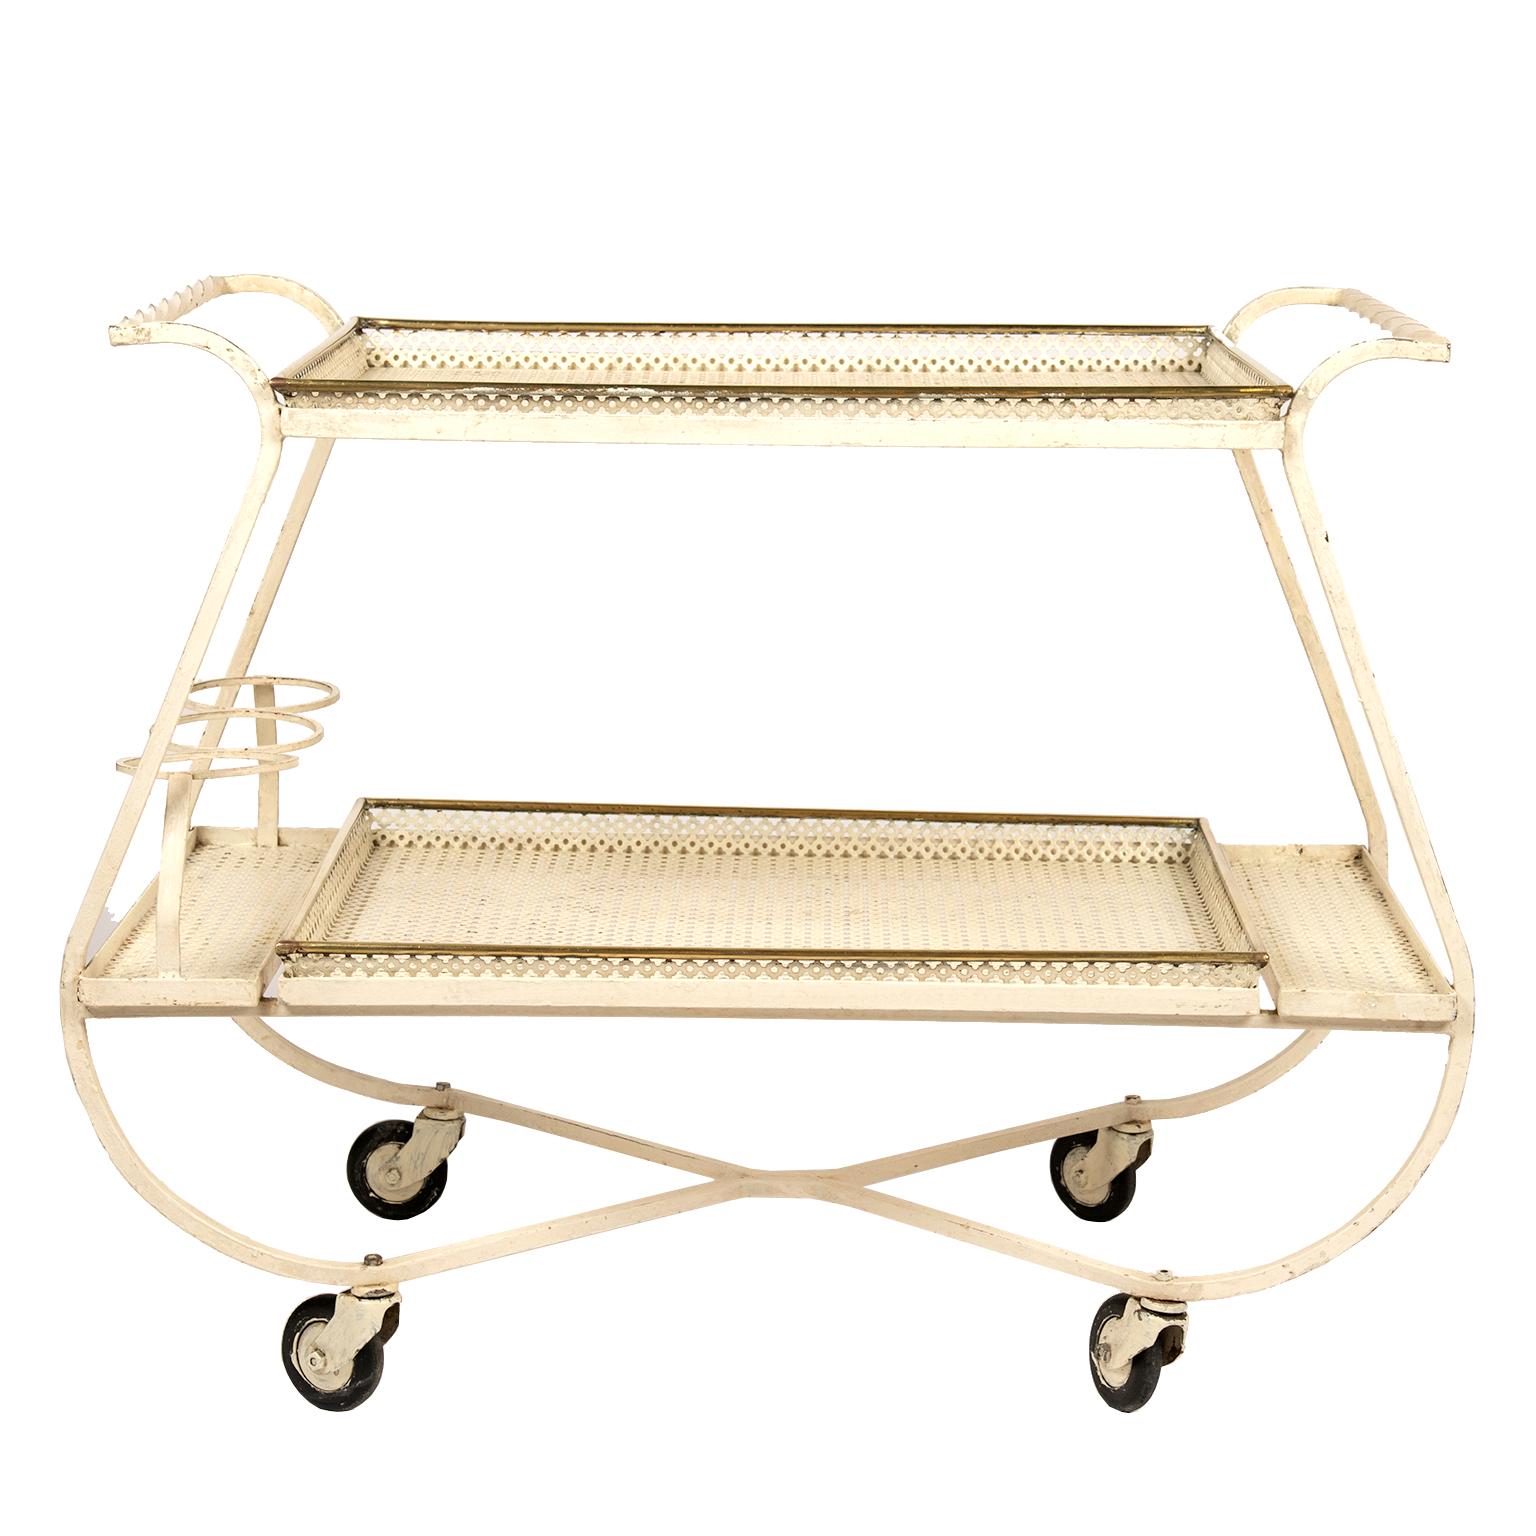 This stylish wrought iron bar cart with perforated quatrefoil mesh removable trays are adorned with polished brass. The cart is in its original French vanilla finish.
My suggestion is to either keep it in its original finish or paint it in the